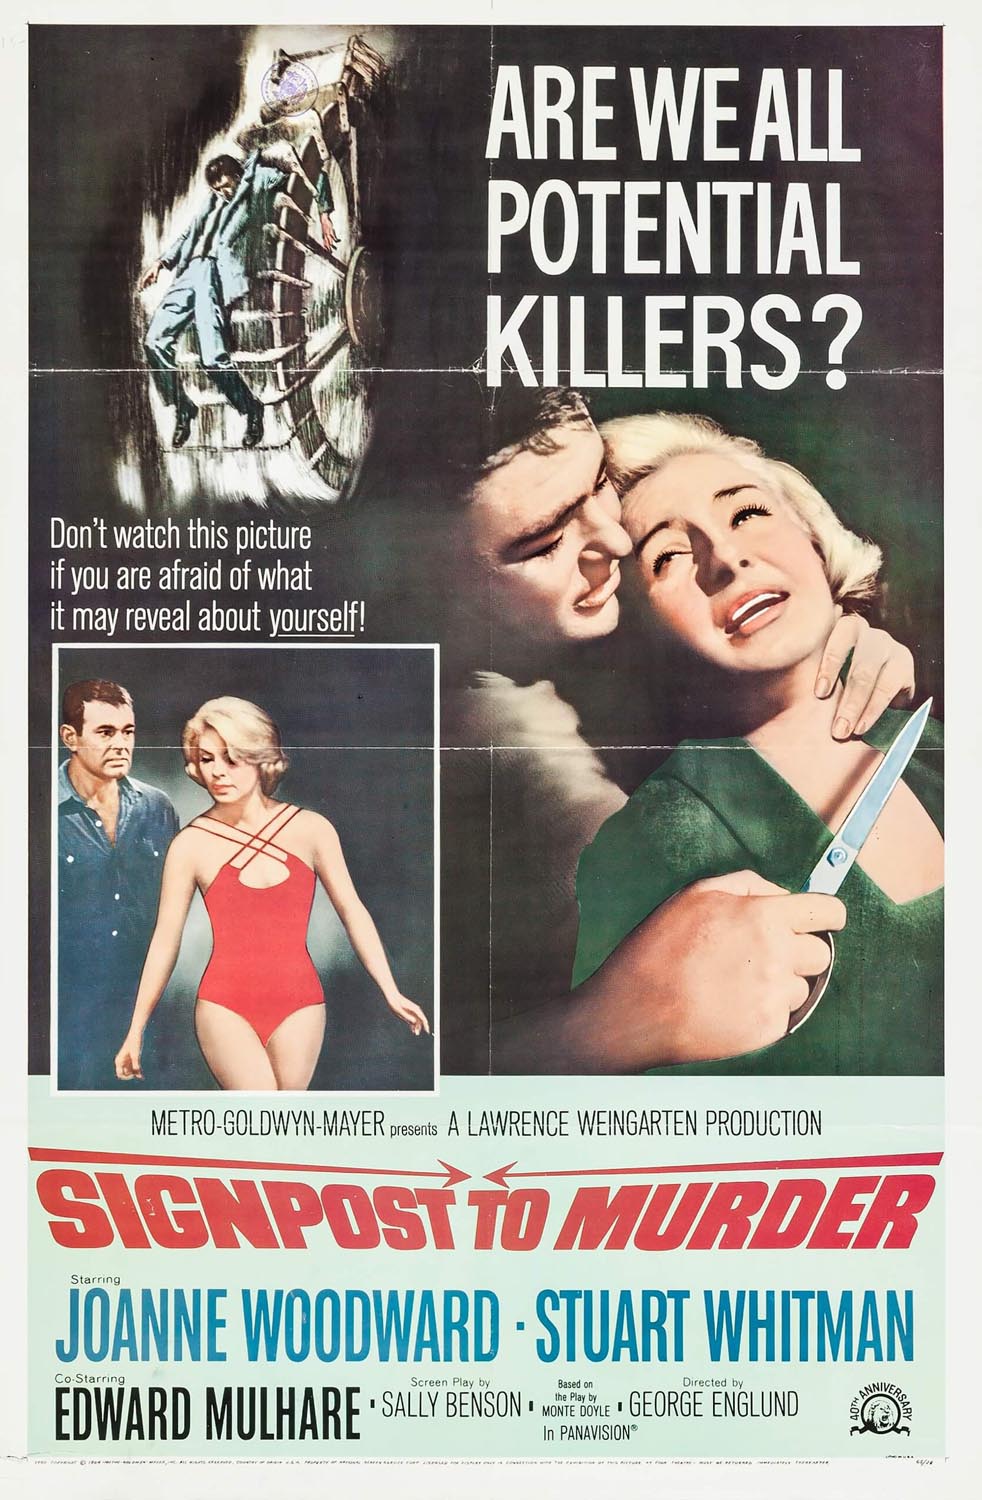 SIGNPOST TO MURDER